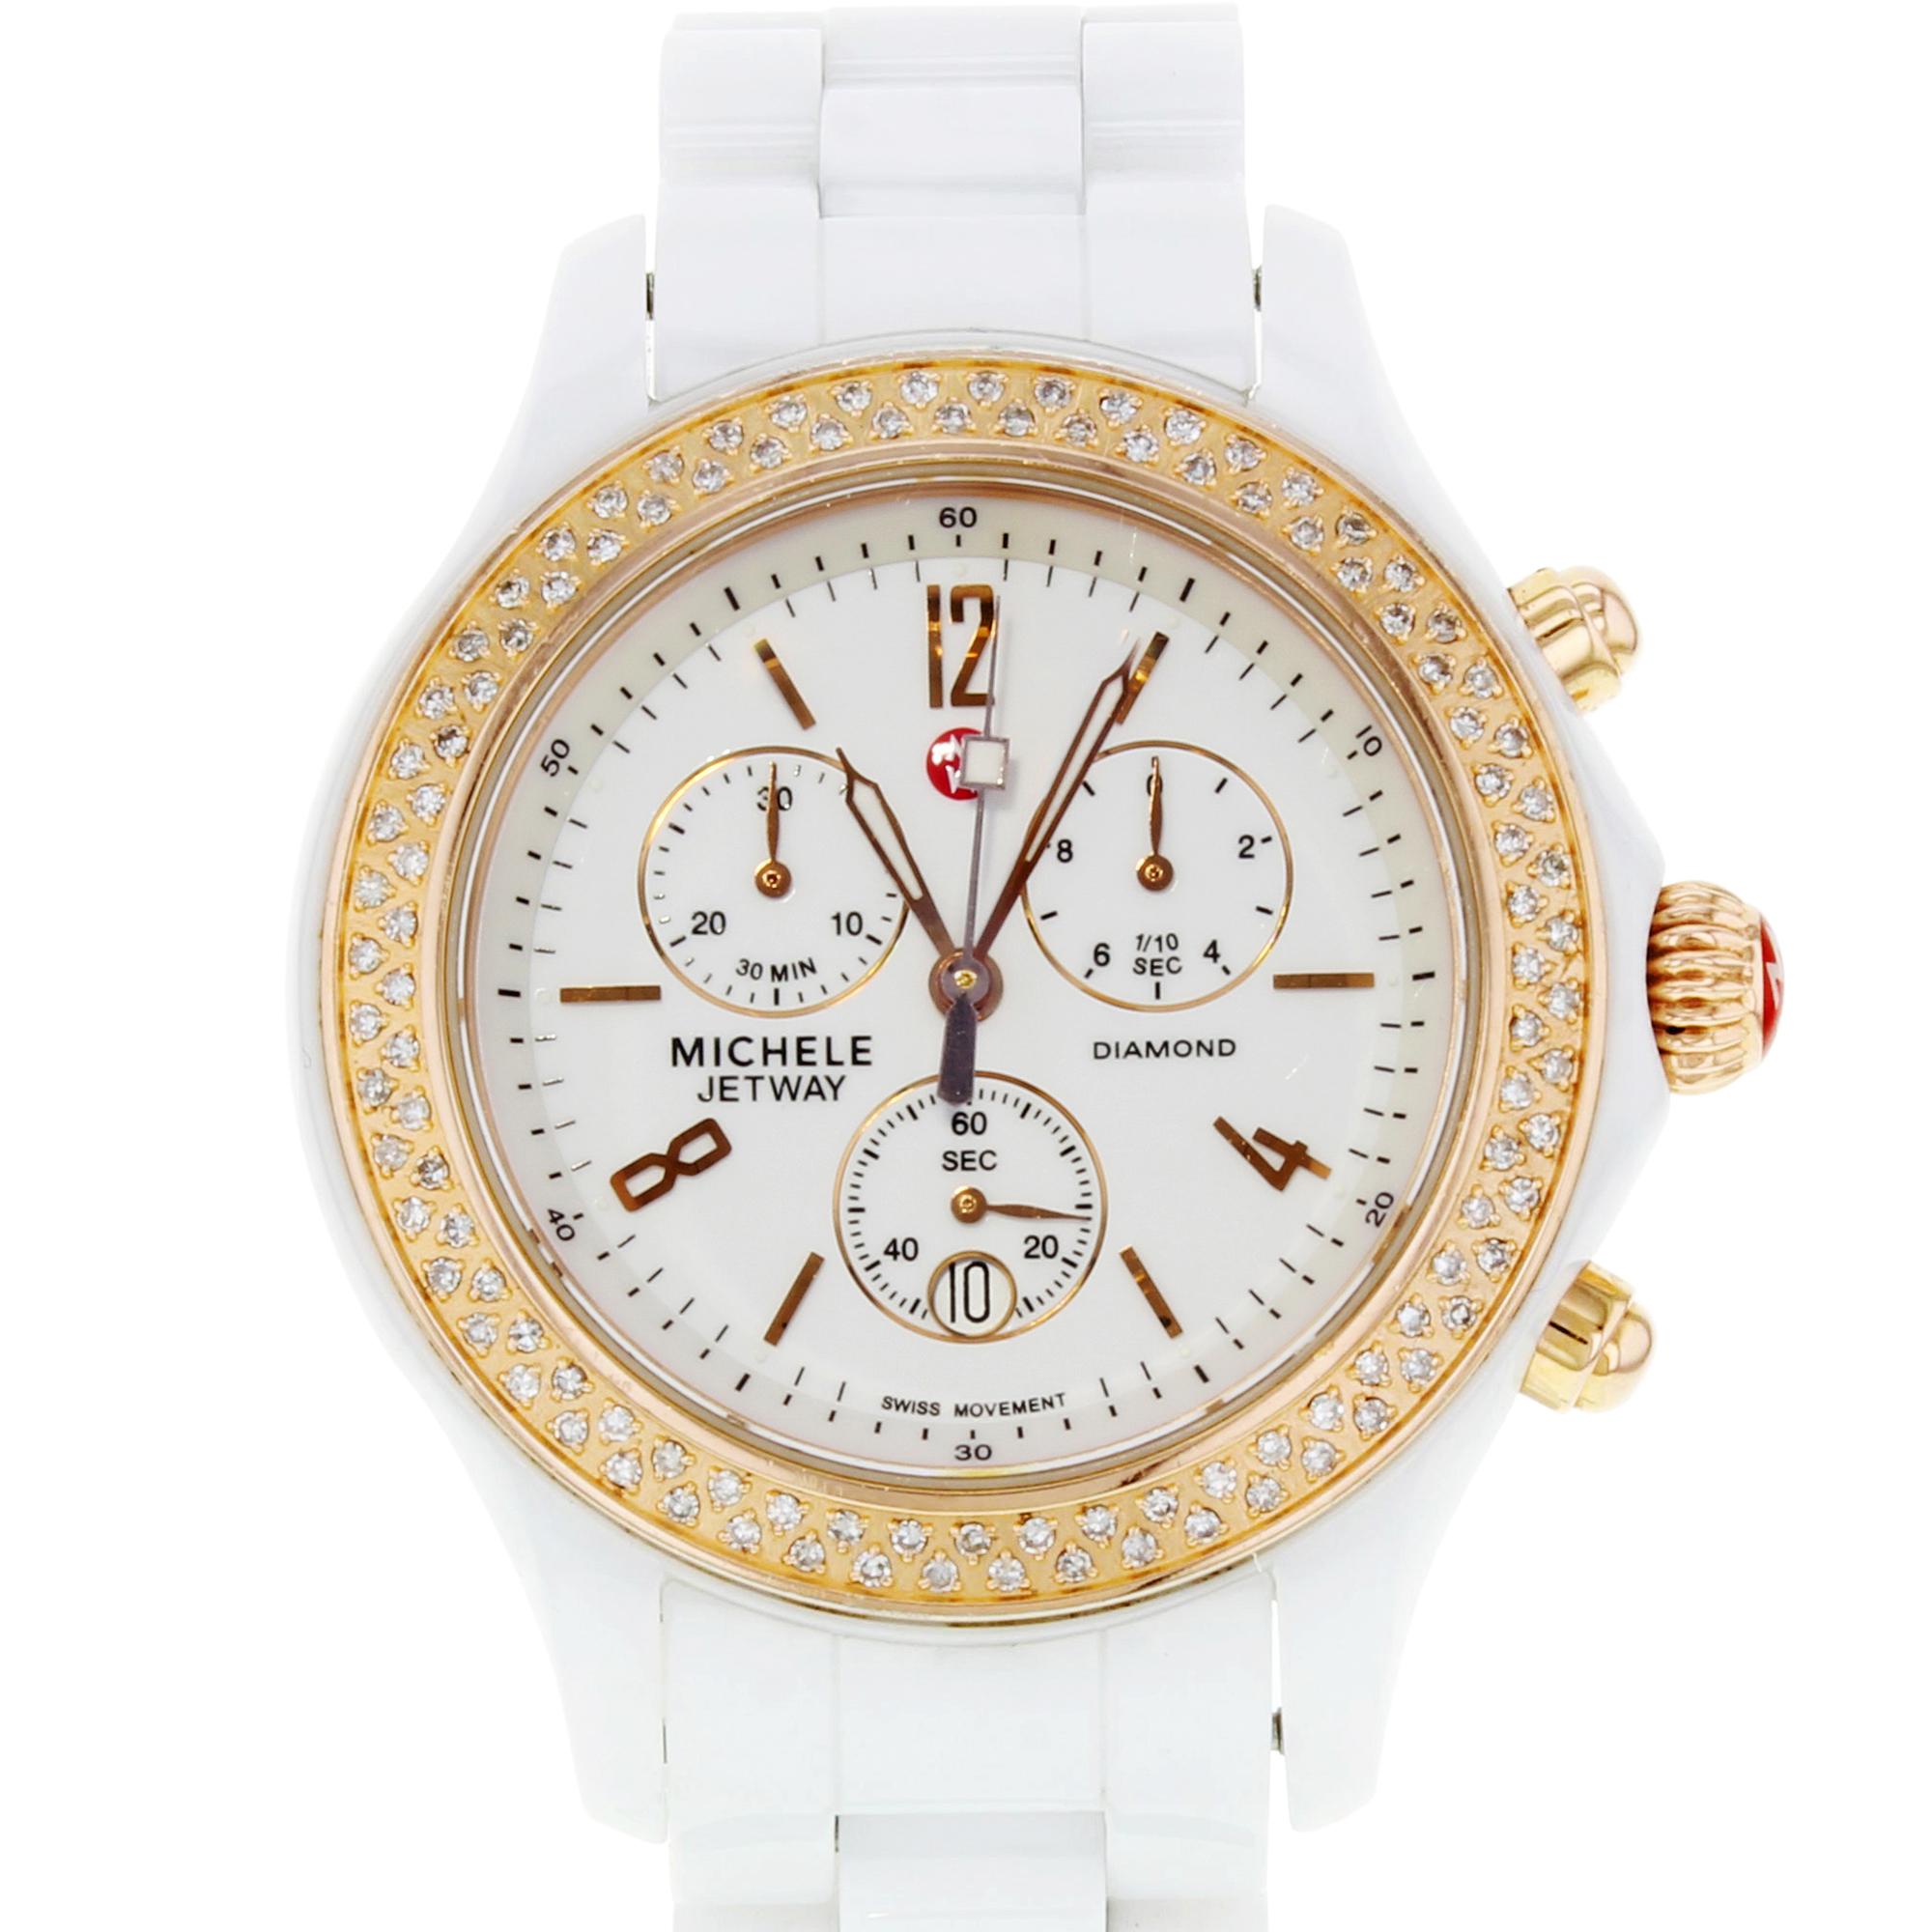 This pre-owned Michele Jetway MWW17B000008 is a beautiful Ladies timepiece that is powered by a quartz movement which is cased in a ceramic case. It has a round shape face, chronograph, date, diamonds, small seconds subdial dial and has hand sticks